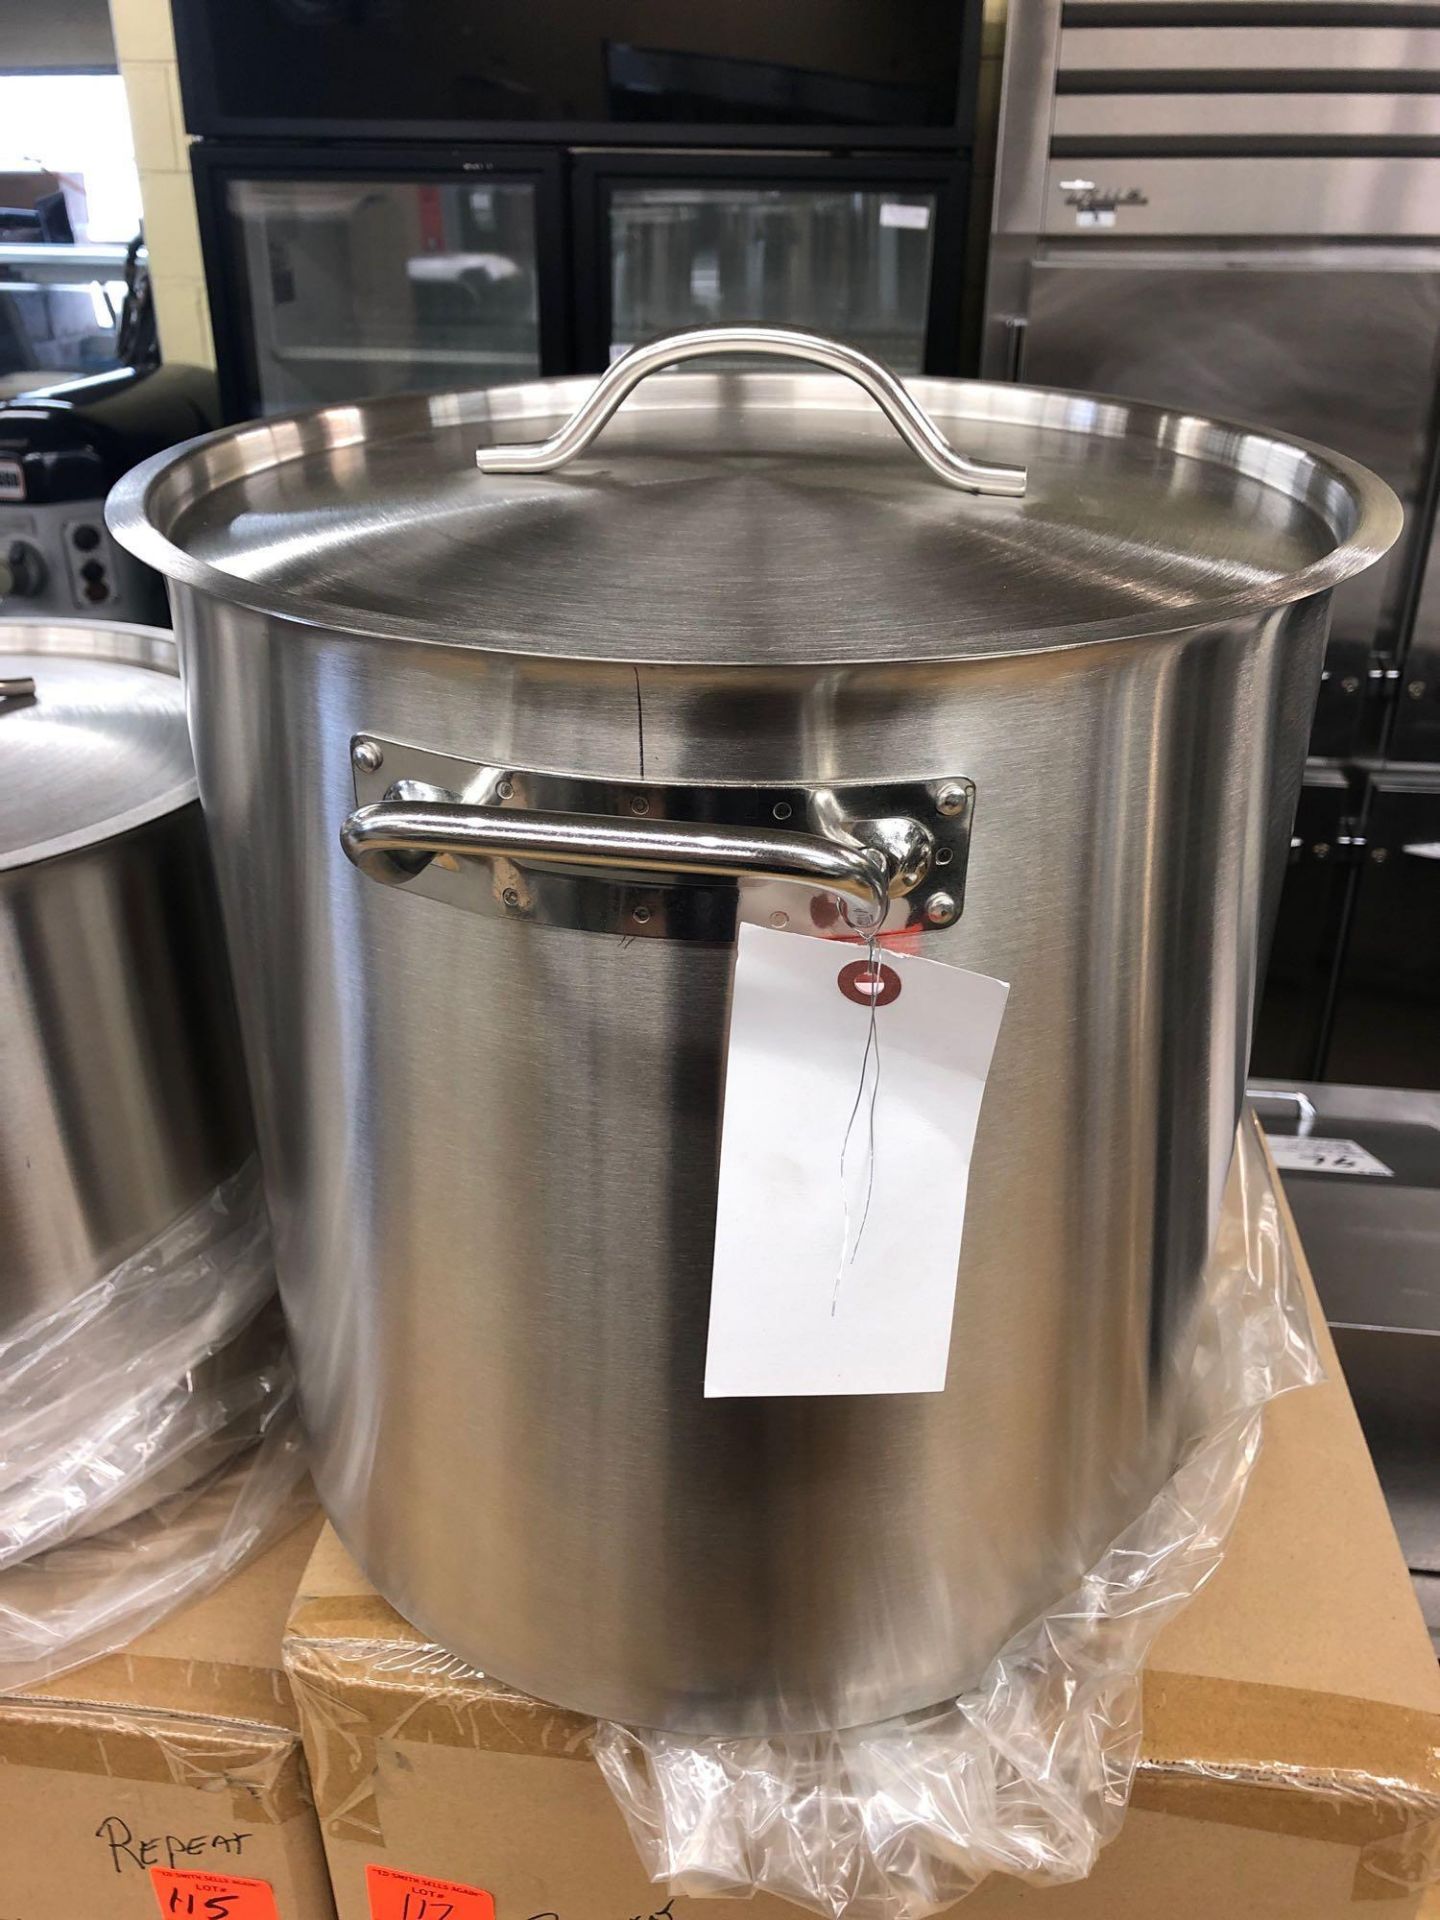 36 L stainless steel stock pot with cover